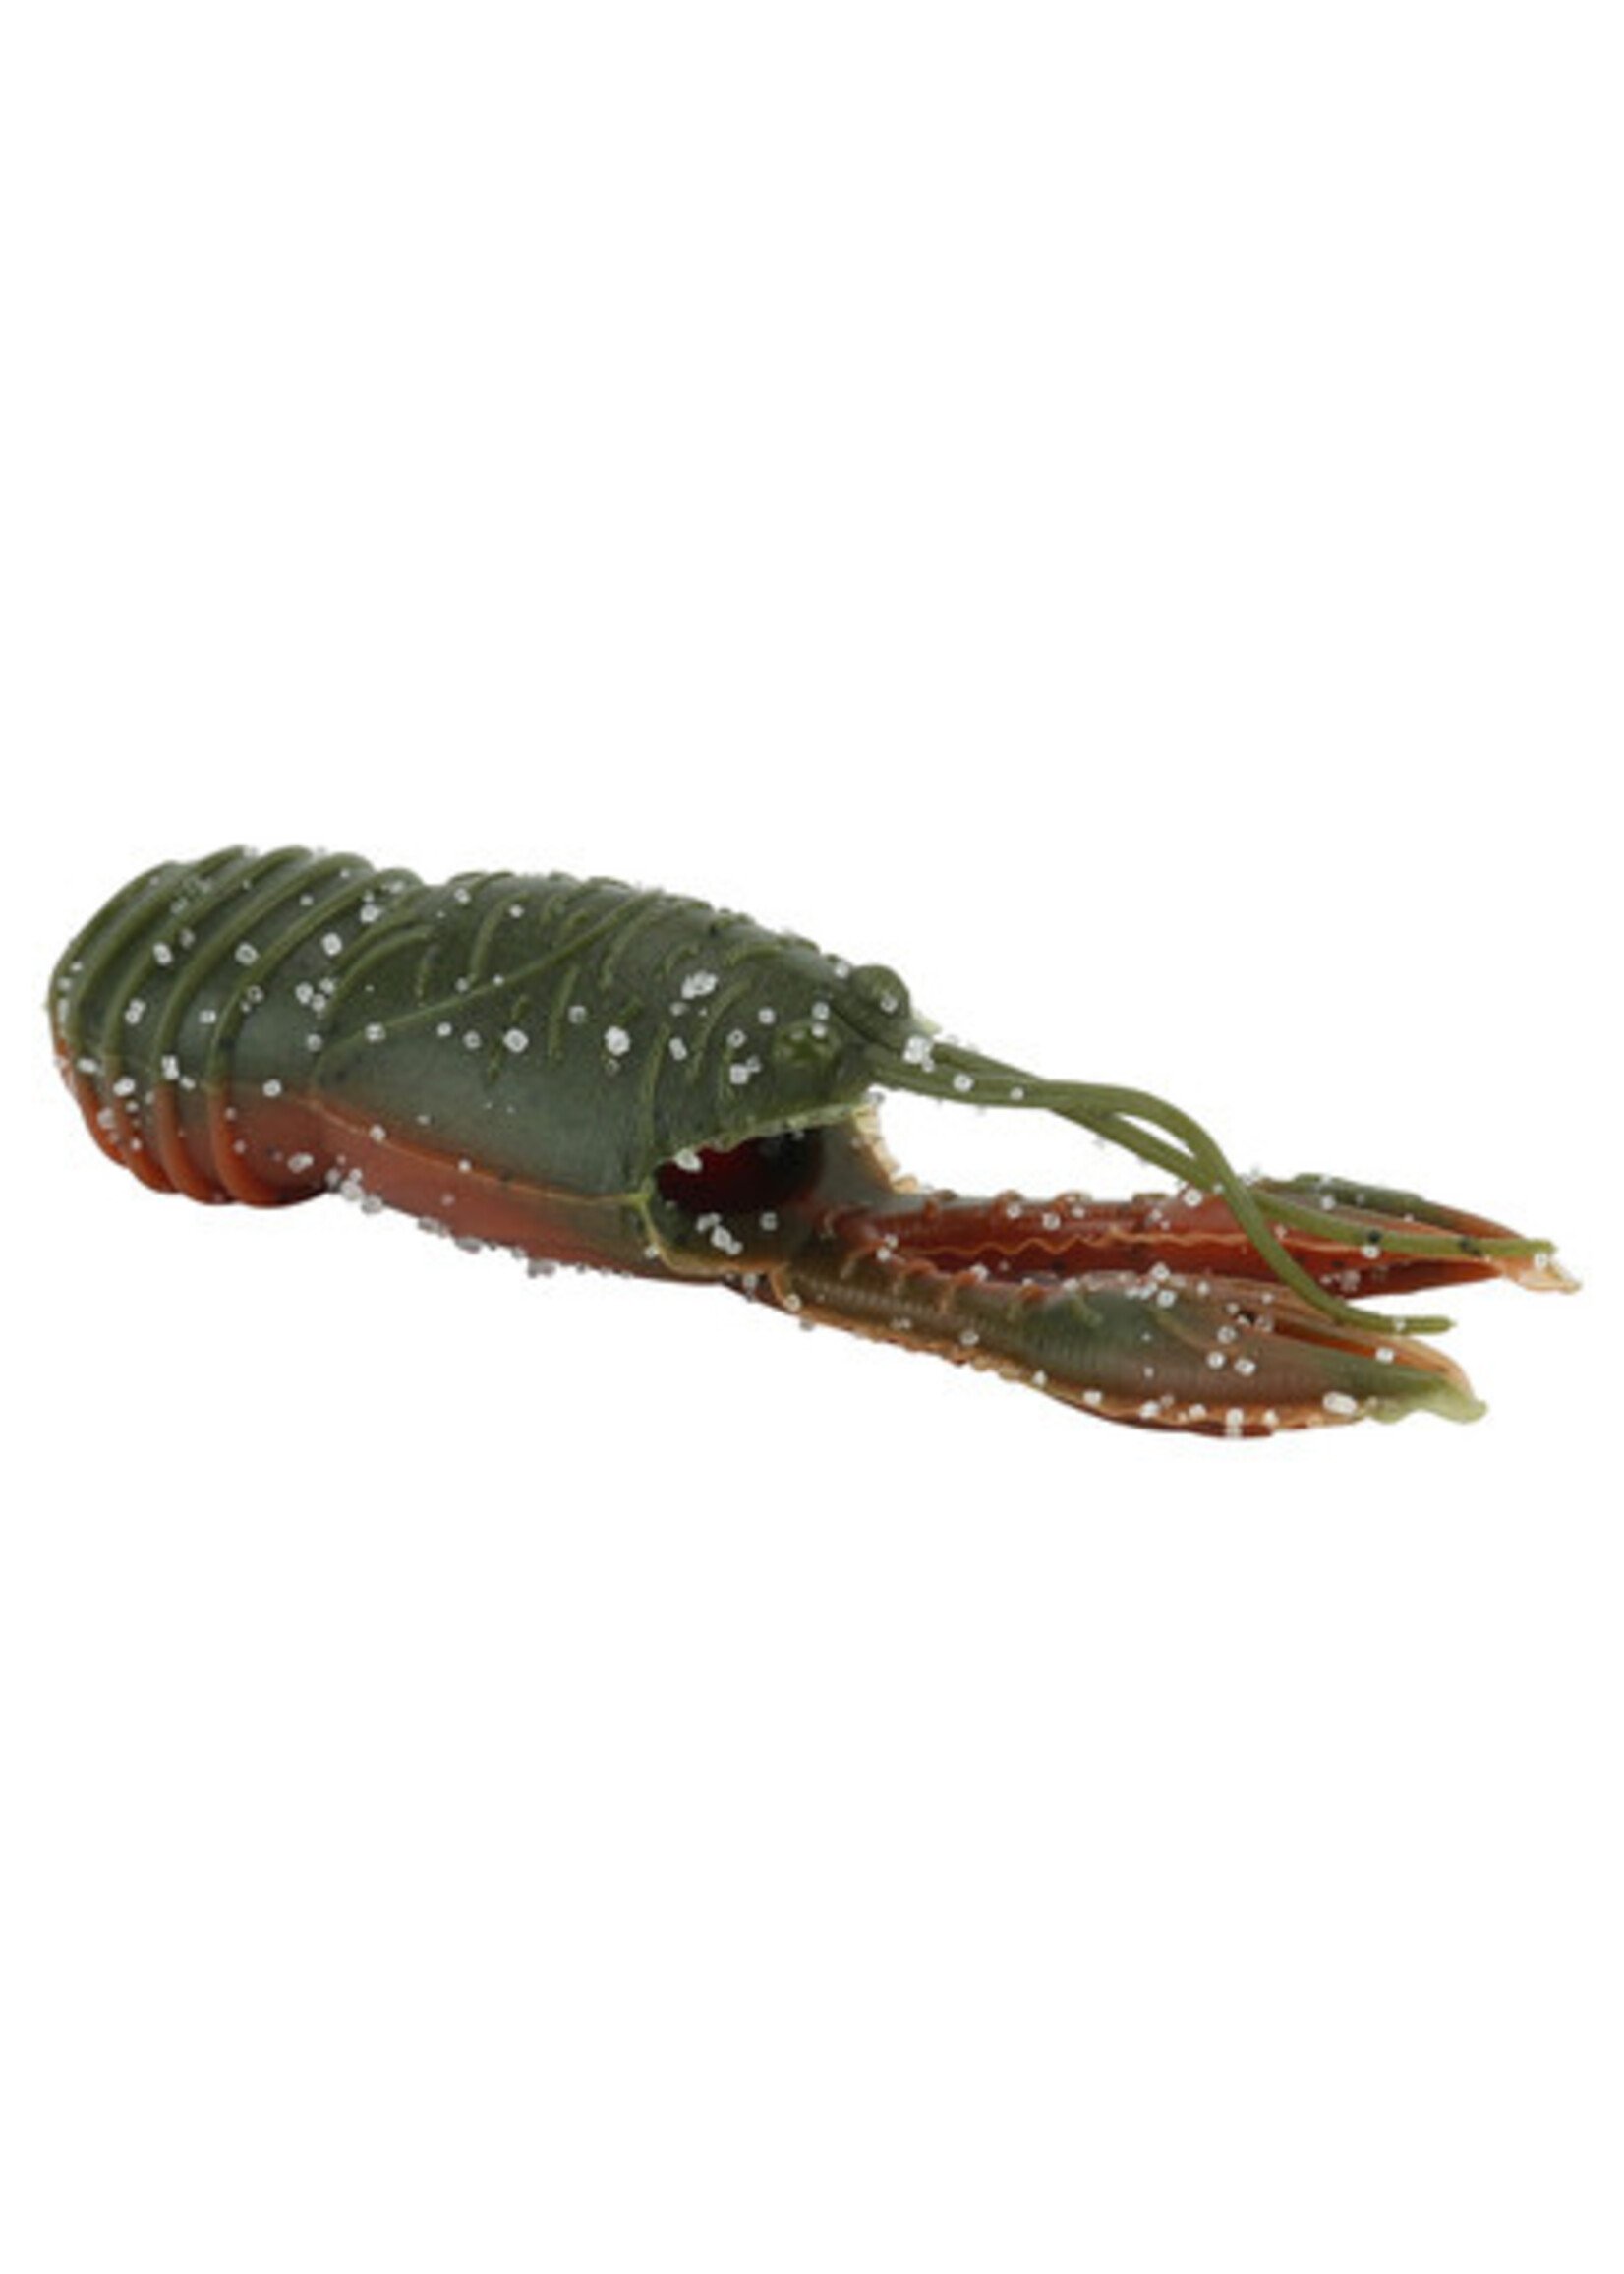 Great Lakes Finesse Great Lakes Finesse 2.5" Juvy Craw